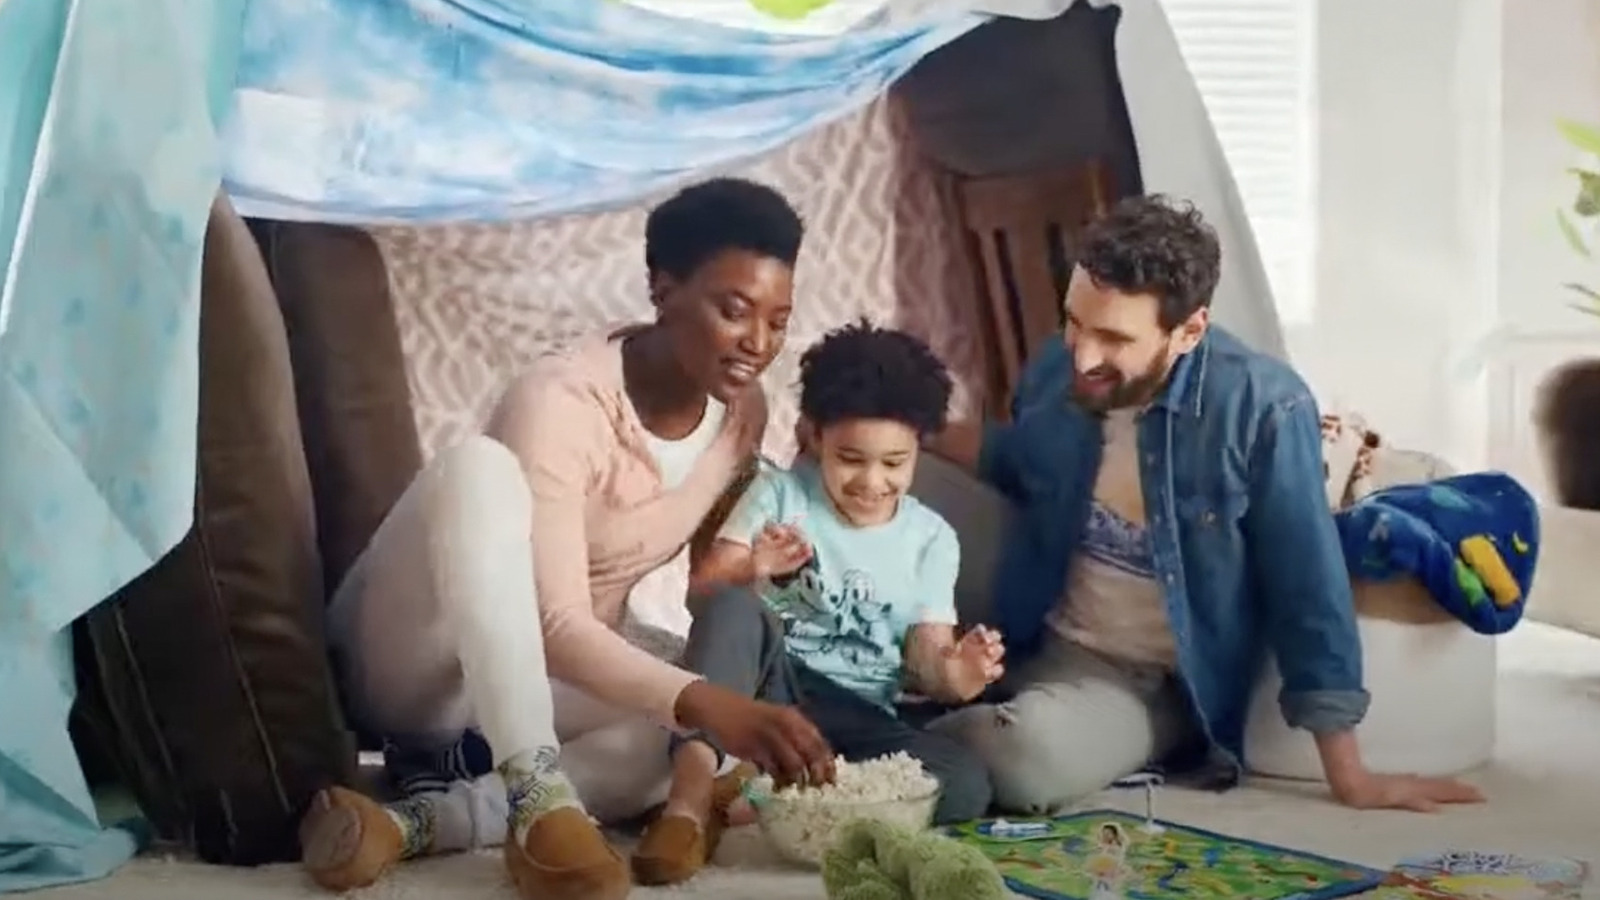 Here's Why The Song In The Kohl's 'Family Fun' Commercial Is So Familiar